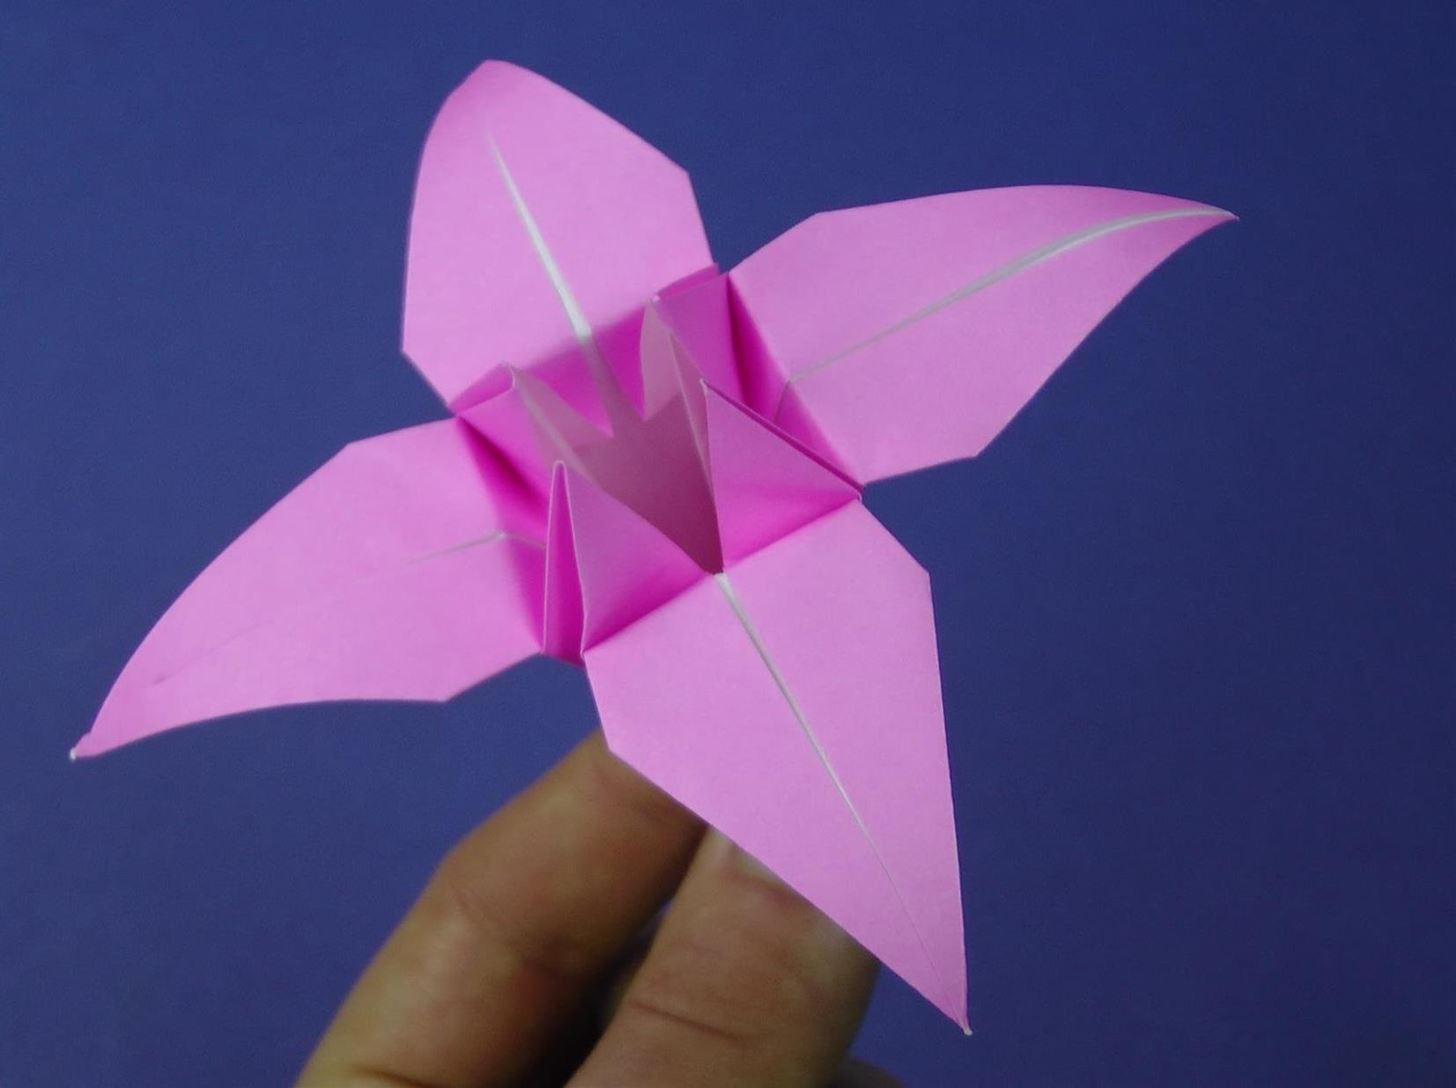 How To Make Origami Lotus Flower Video How To Make An Origami Lily Flower Origami Wonderhowto